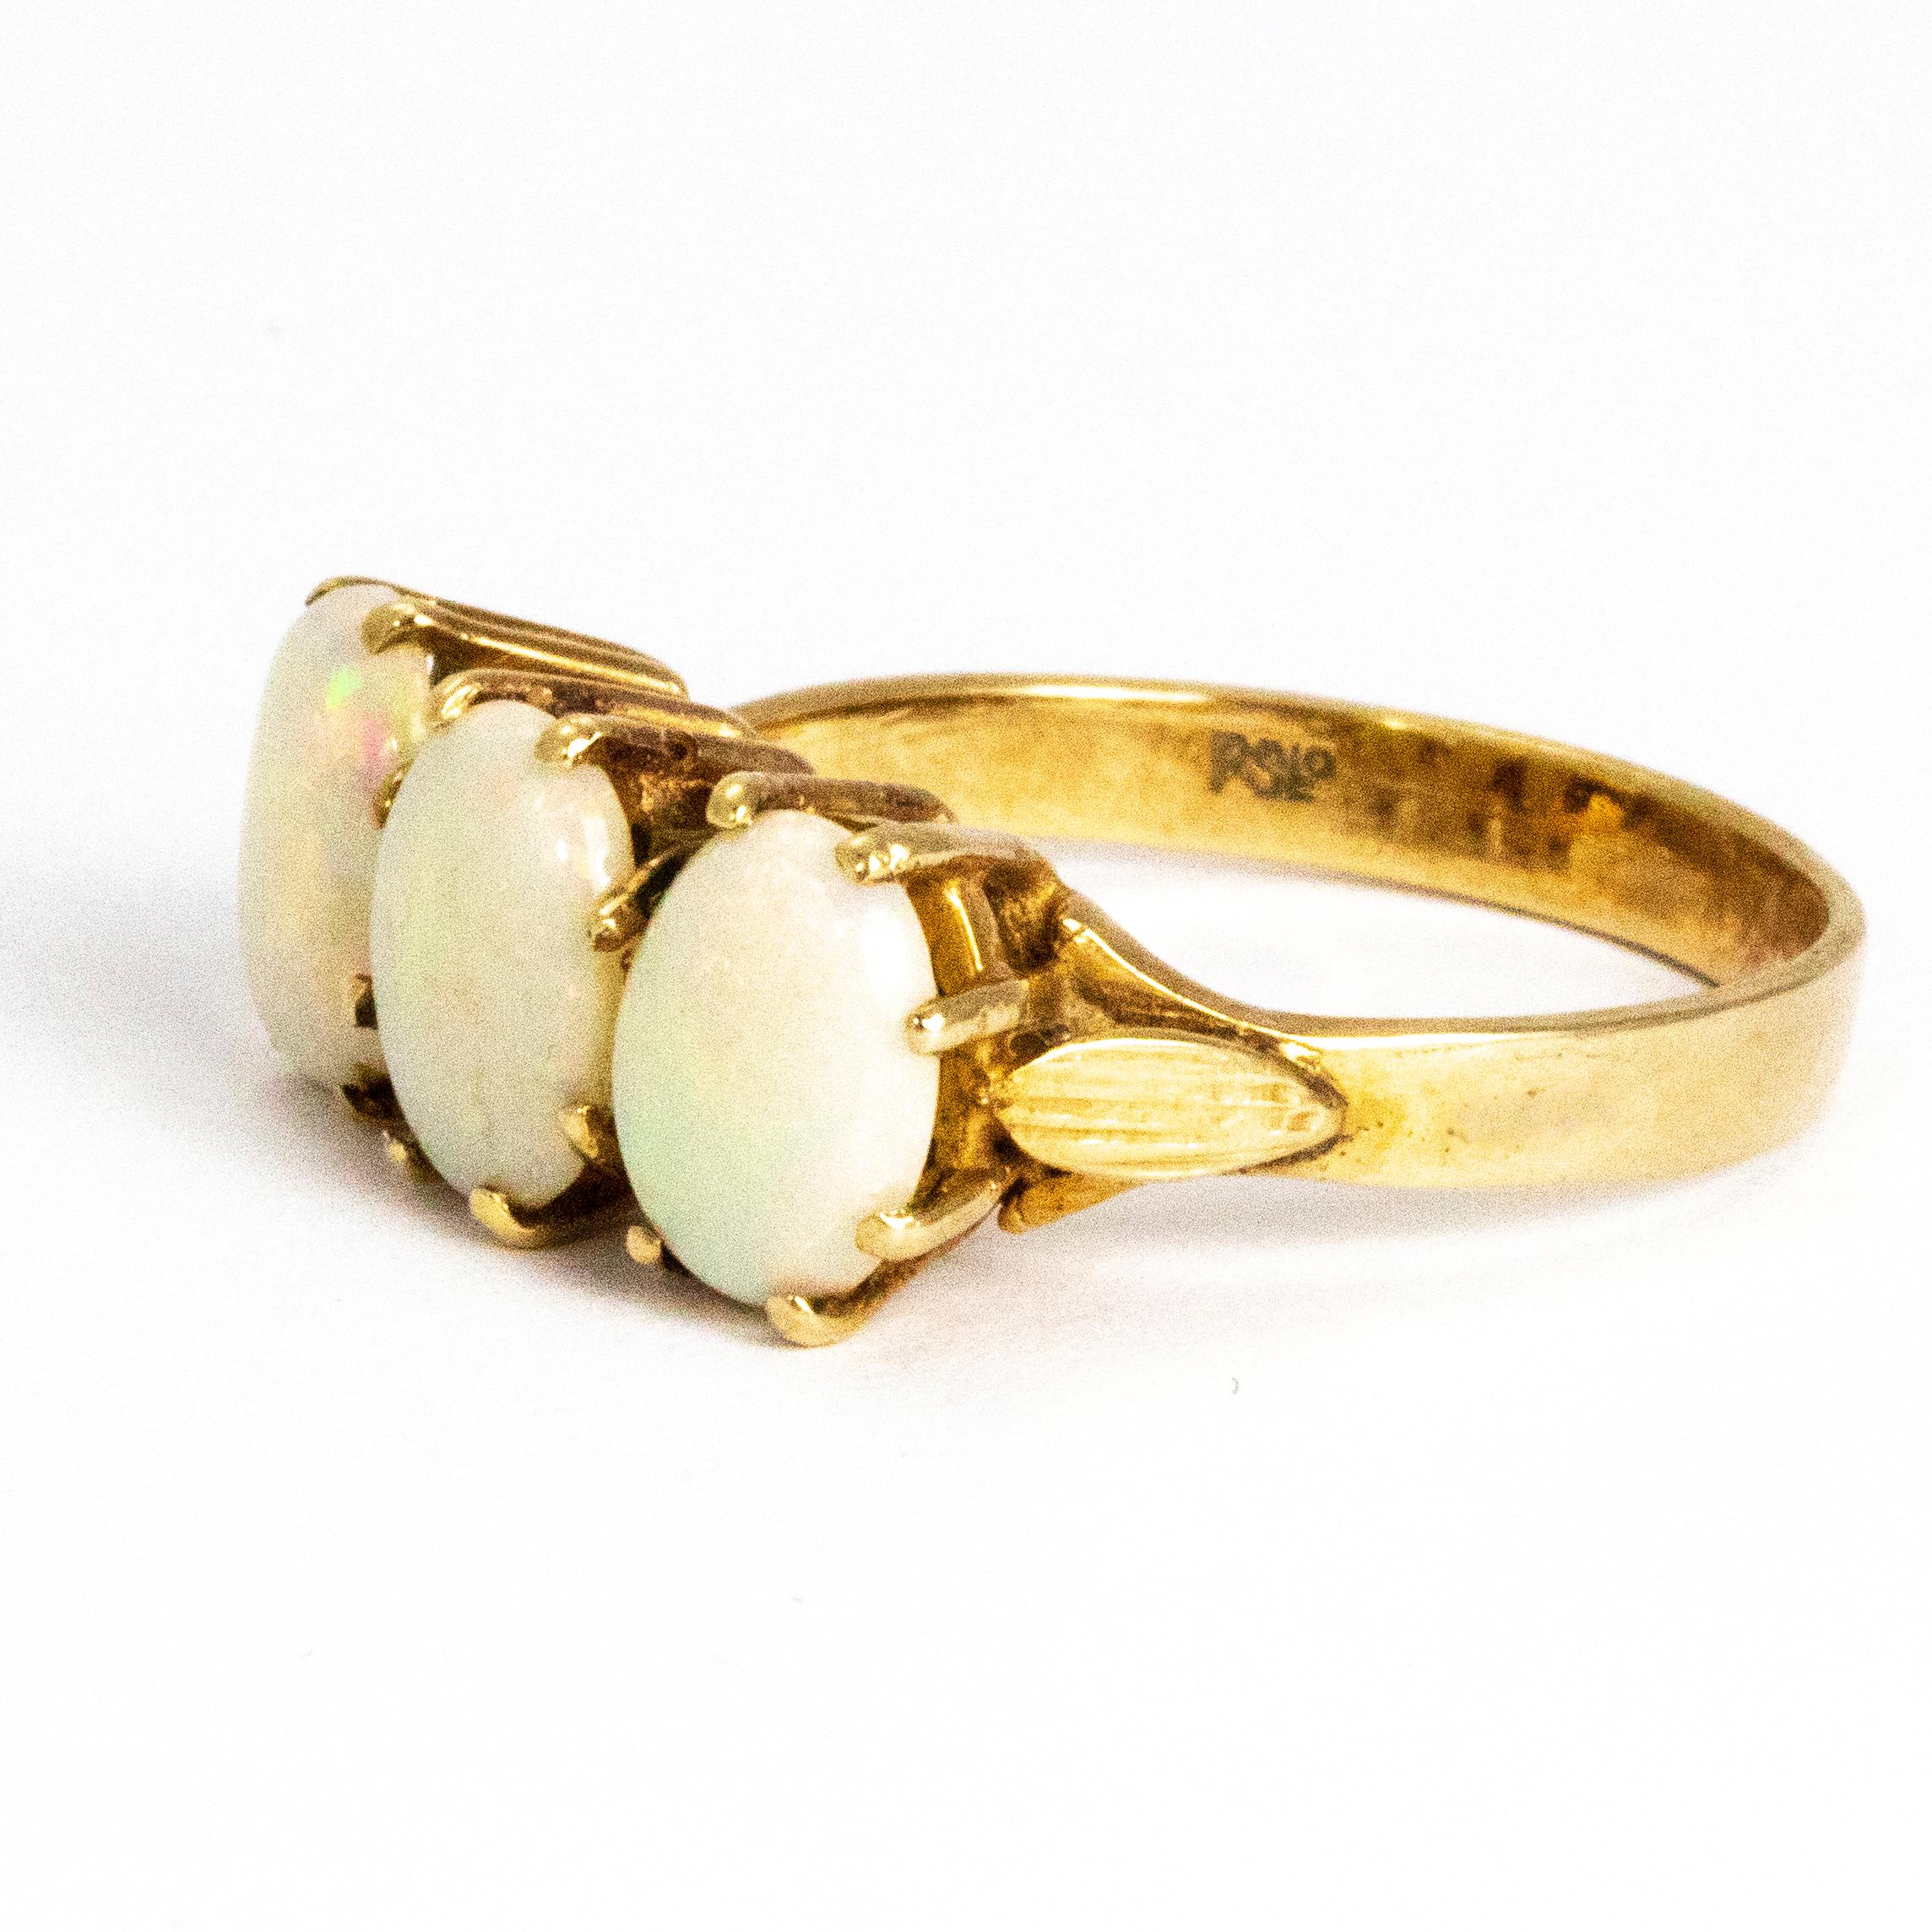 This three stone ring is rather stunning! It holds three lovely, large oval shape opals held in tall open claw settings. This iridescent stunner is modelled out of 9ct gold and made in London, England.

Ring Size: Q or 8
Ring Width (widest point):